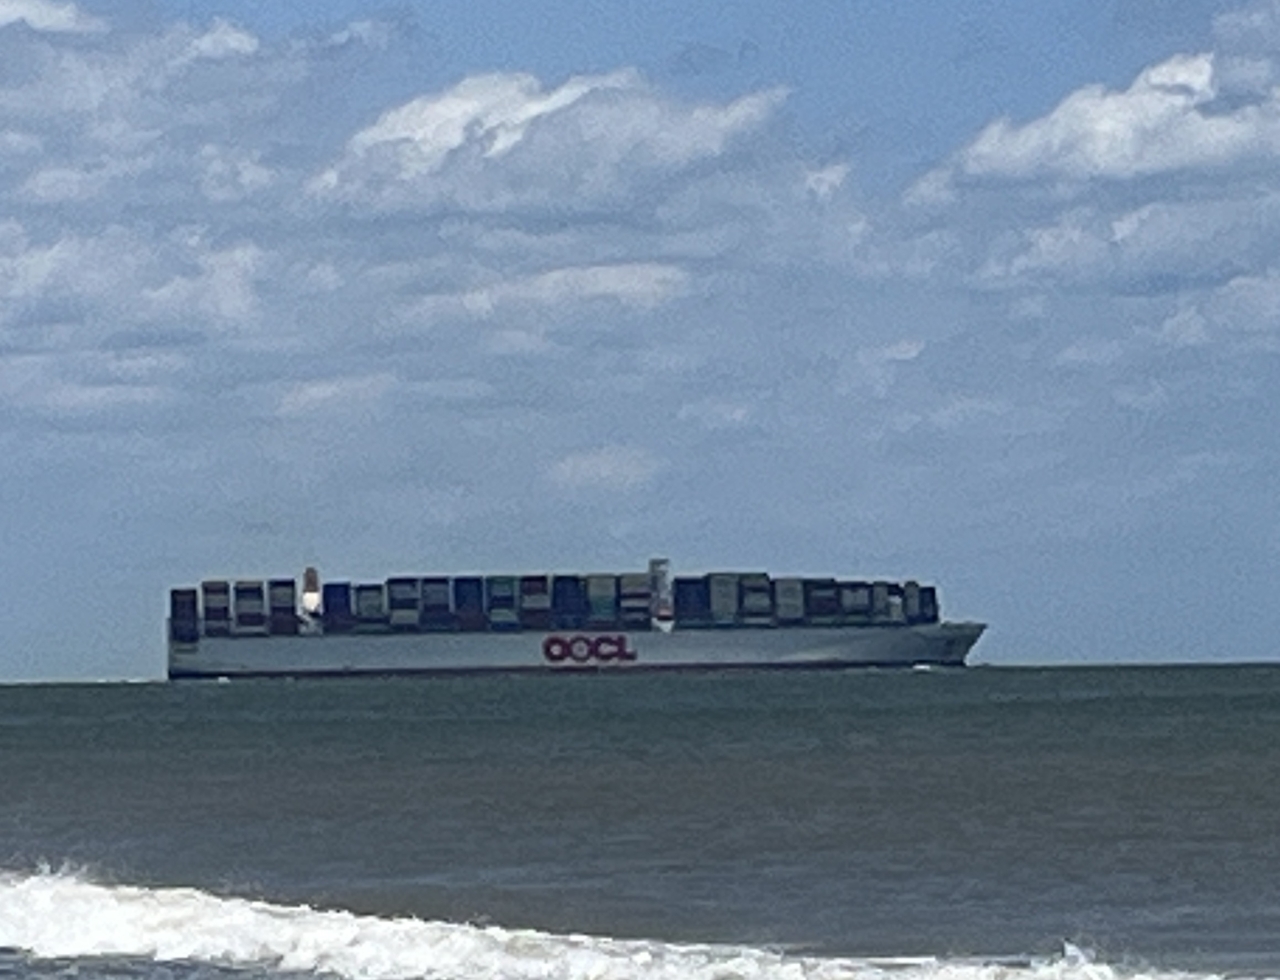 Shipping Containers Crossing Ocean Before